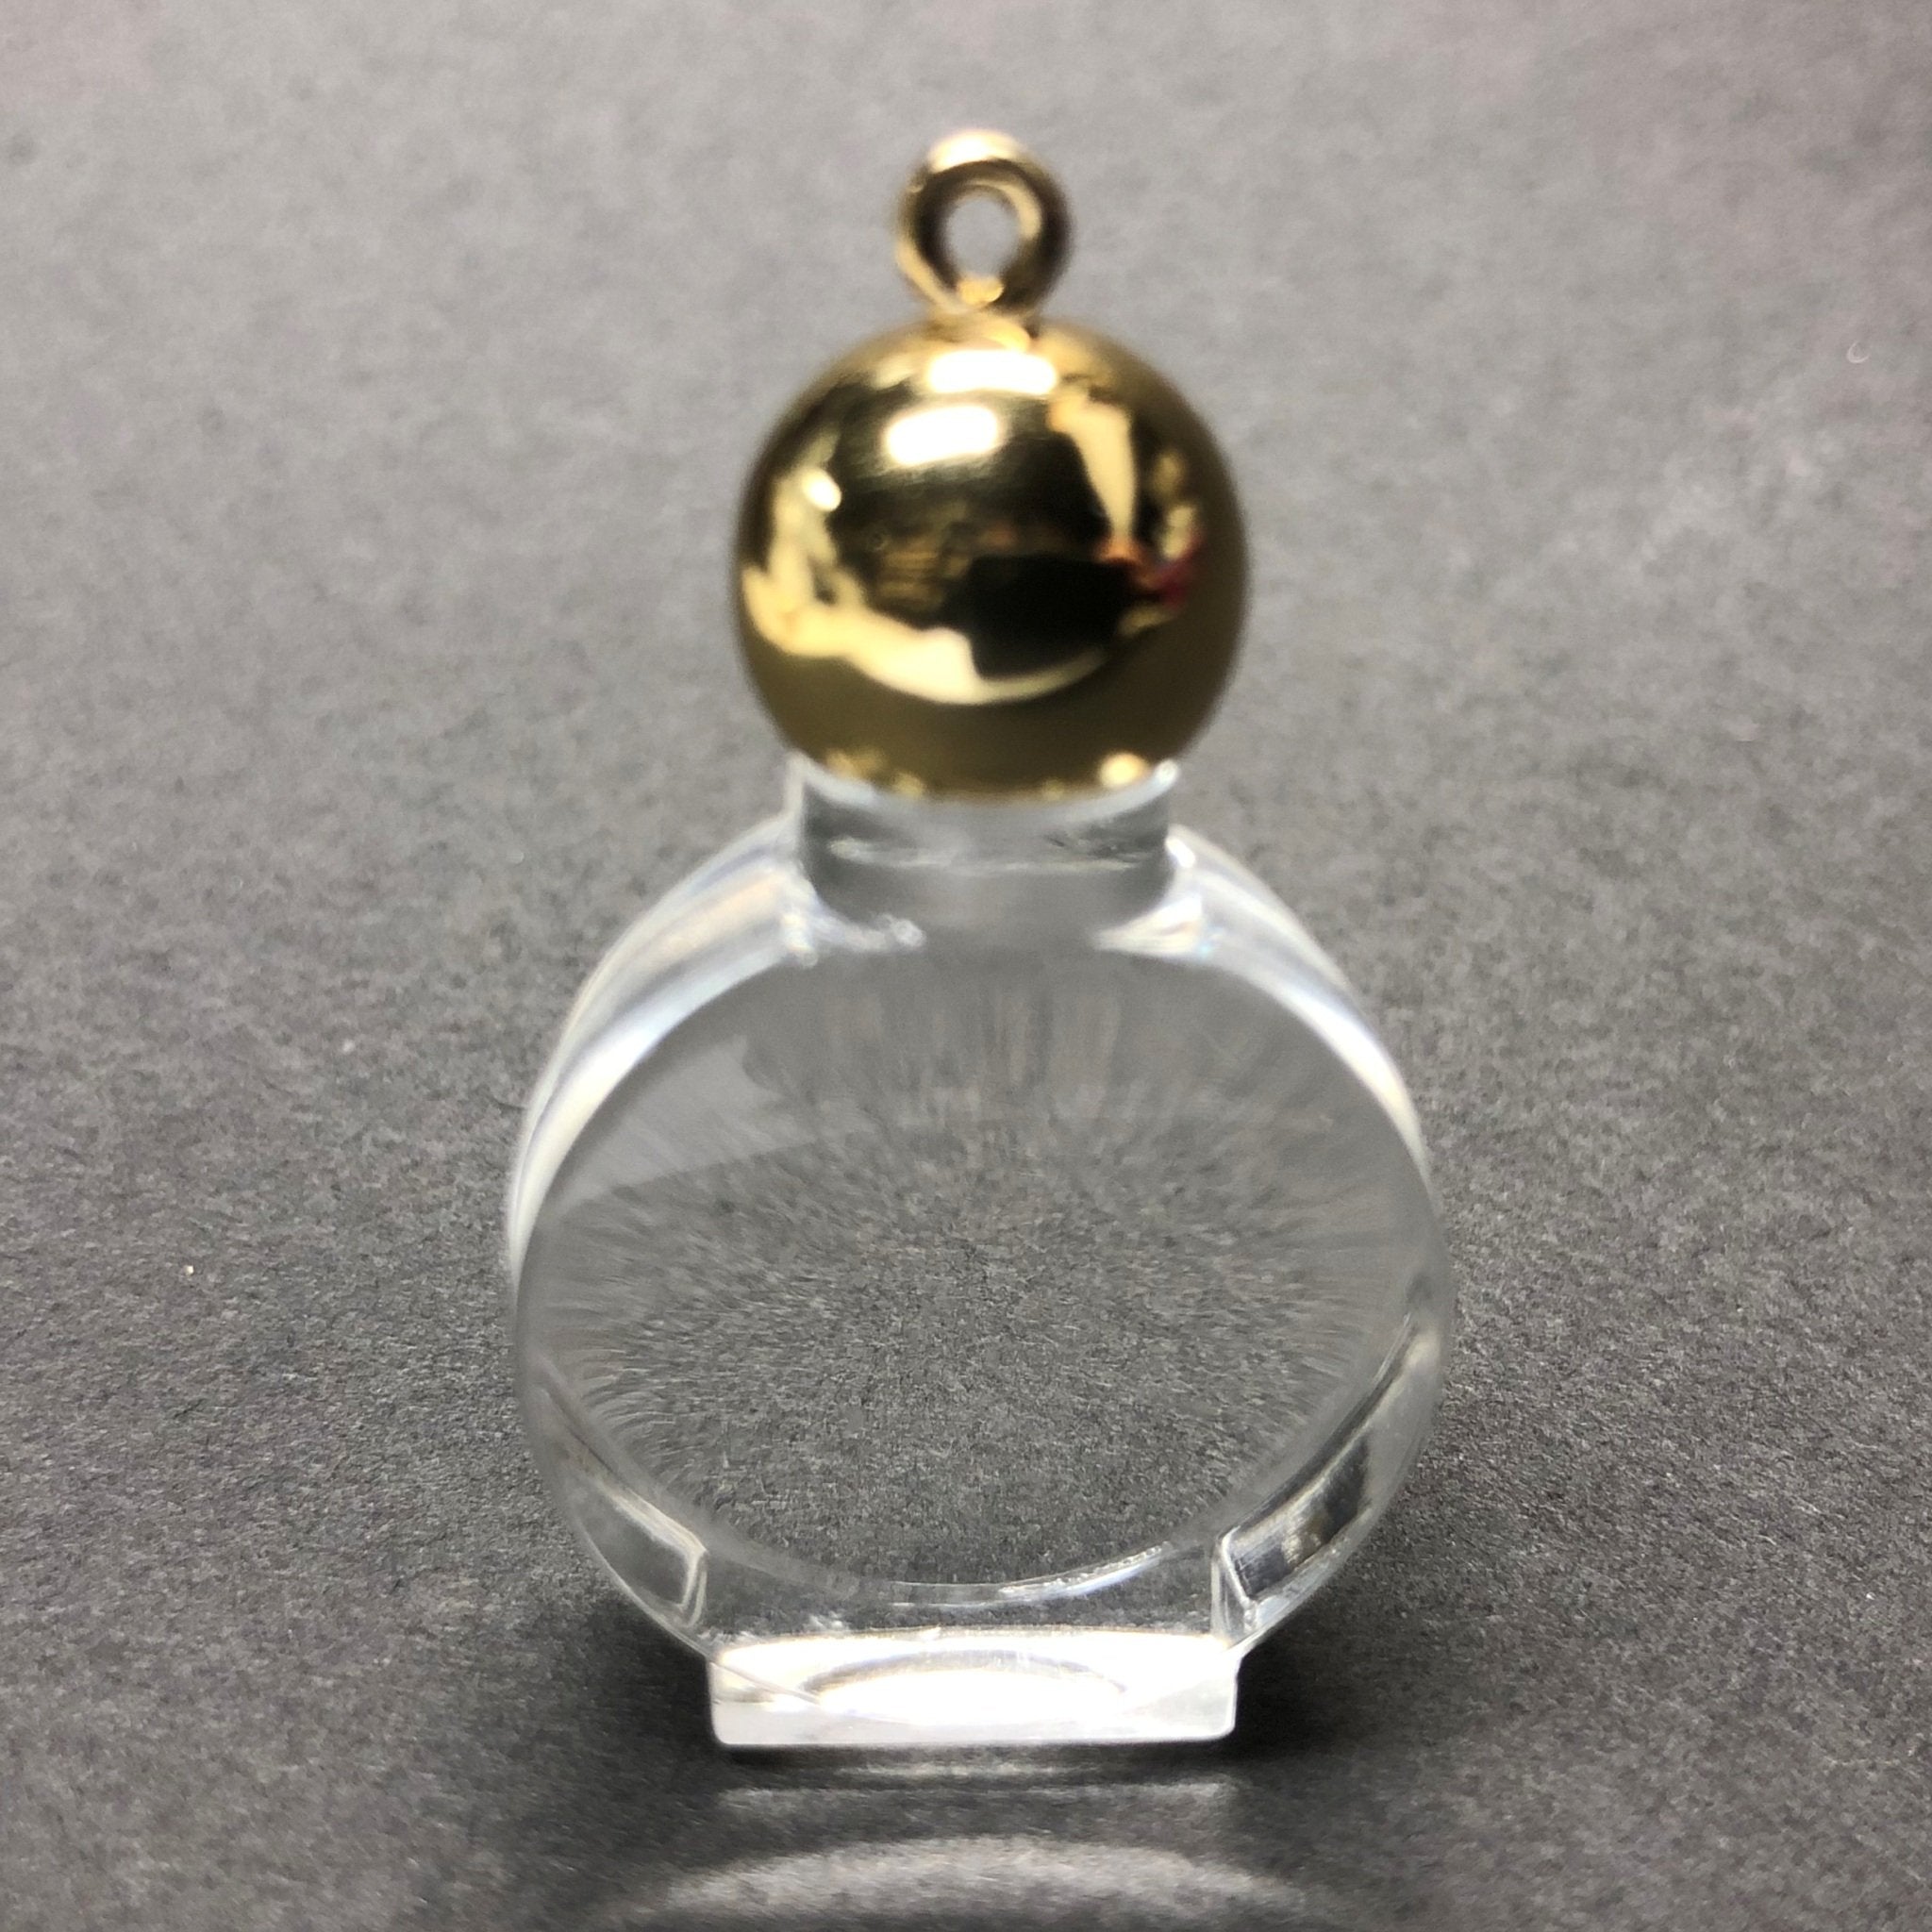 37X23MM Cry-Gold Cap Perfume Bottle Acrylic Drop (6 pieces)